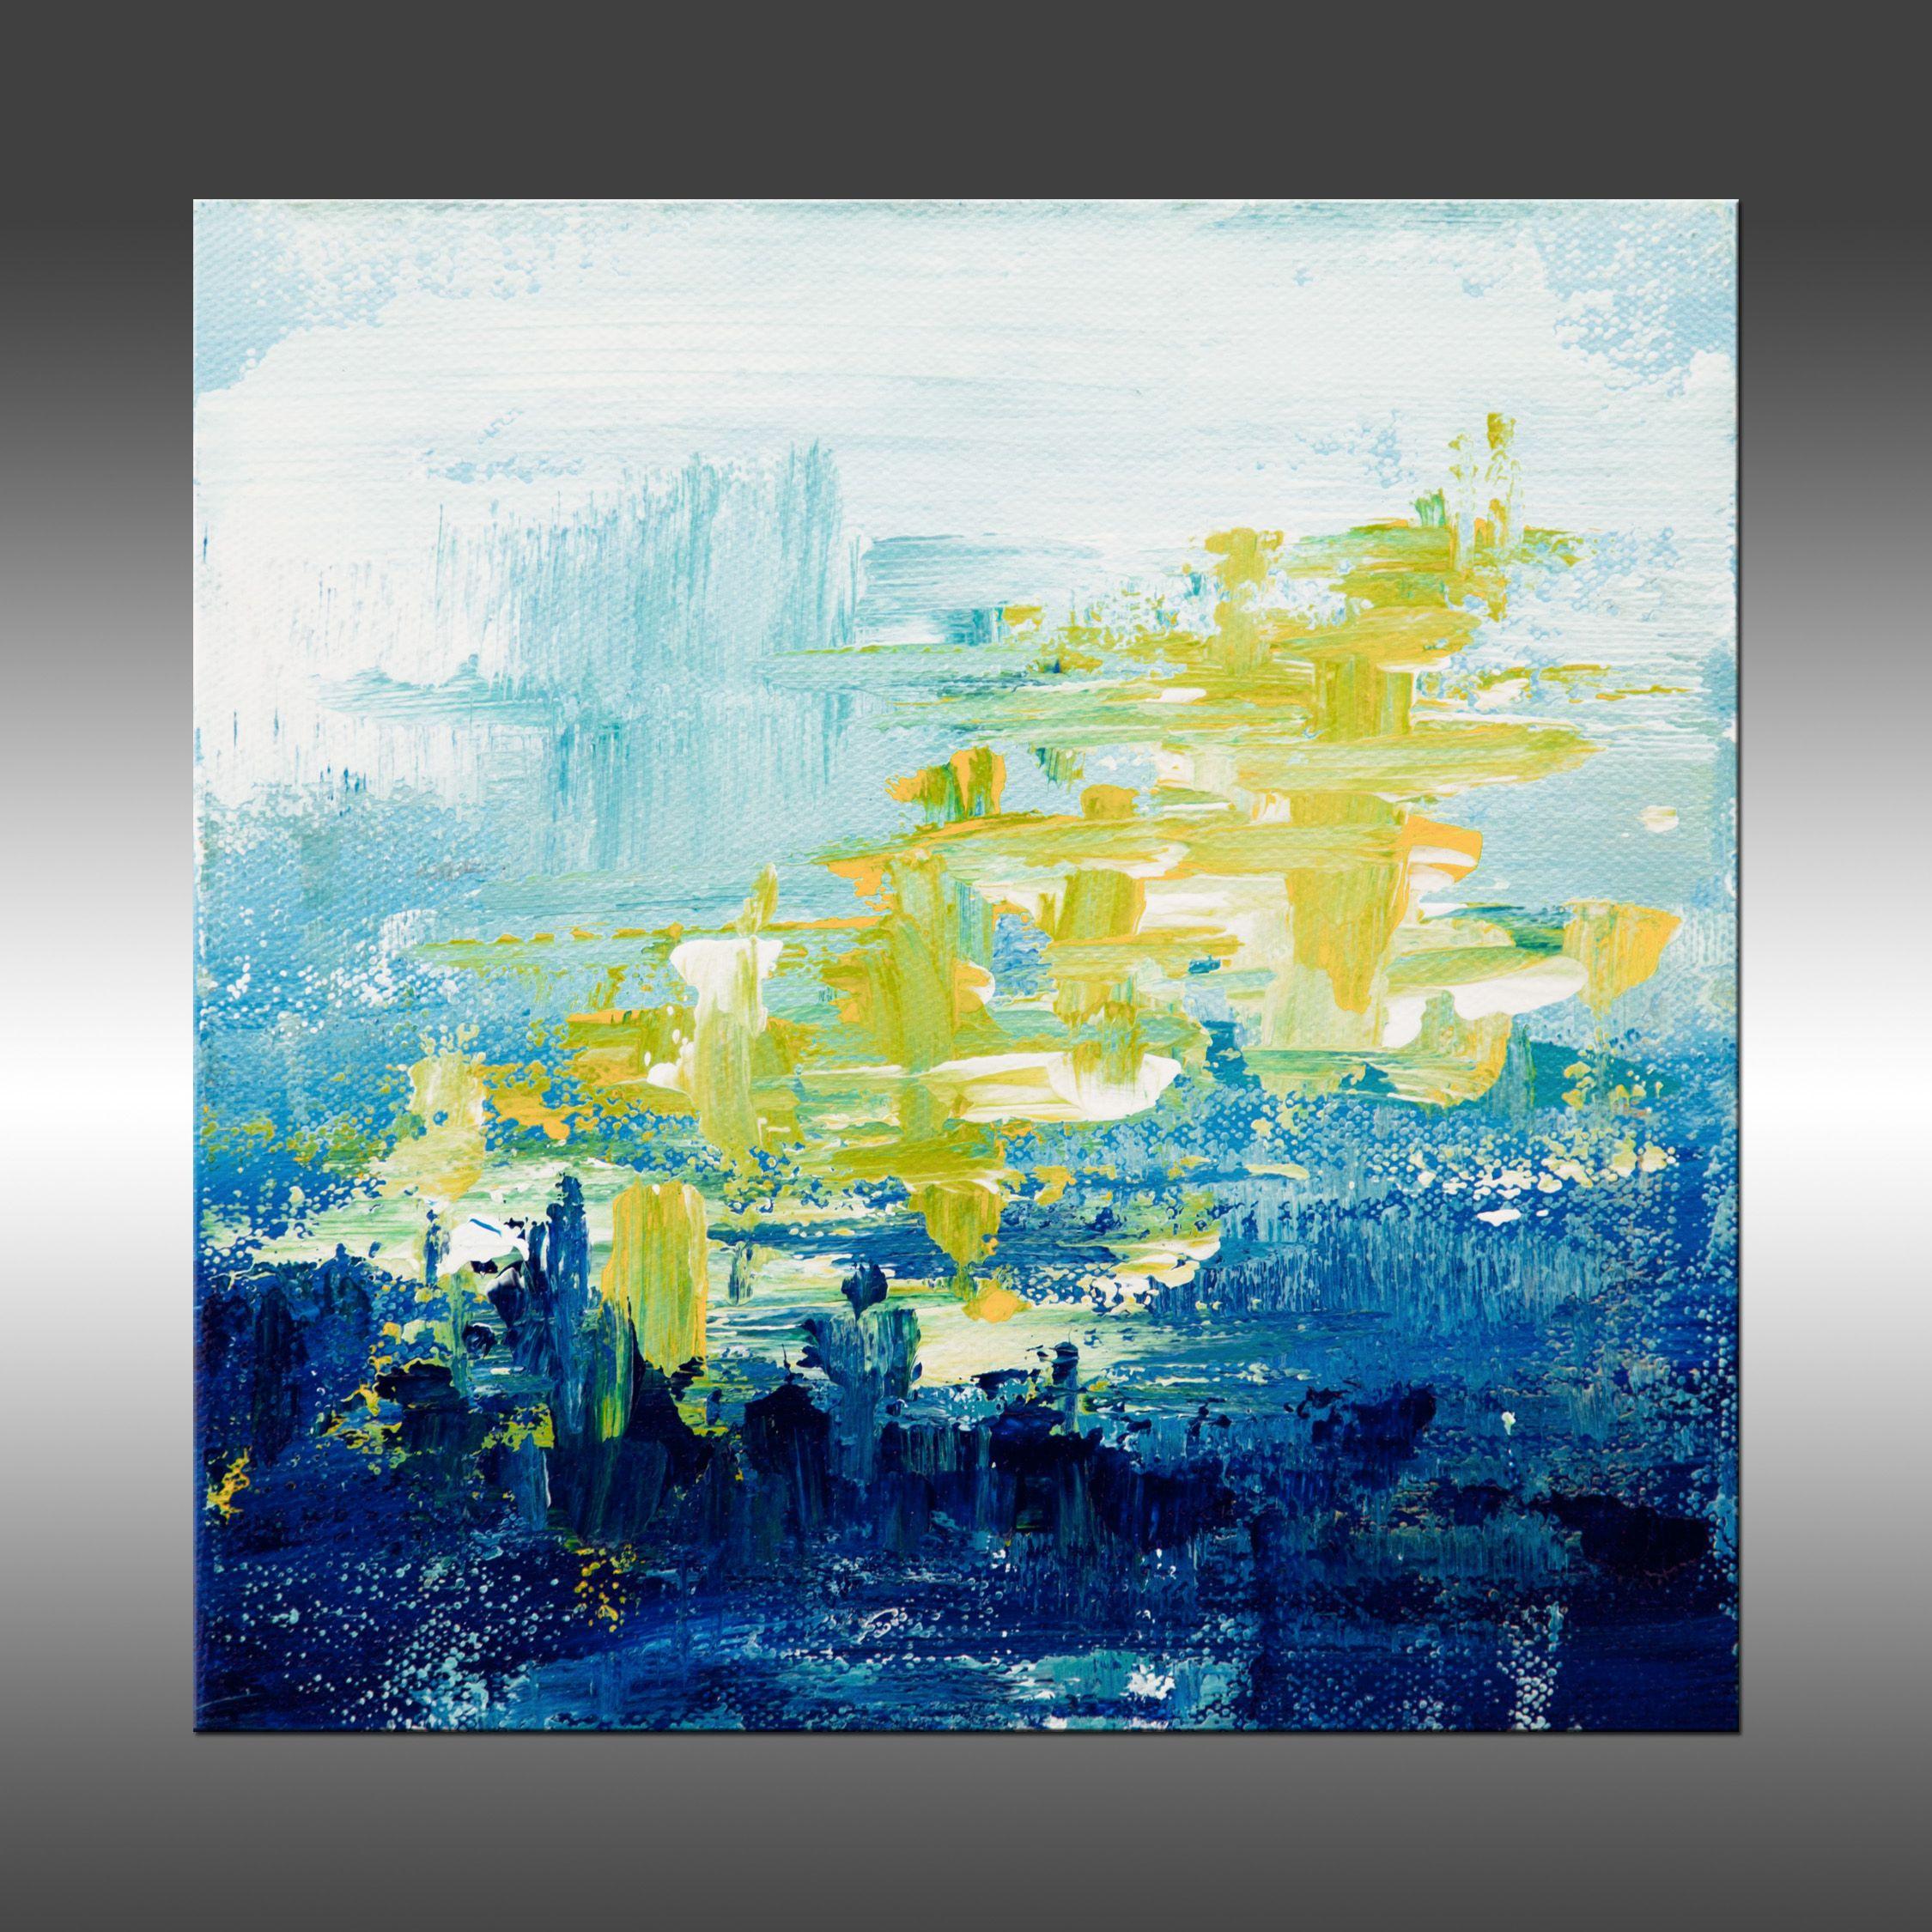 Ascension 6 is an original painting, created with acrylic paint on gallery-wrapped canvas. It has a width of 8 inches and a height of 8 inches with a depth of 1.5 inches (8x8x1.5).    The colors used in the painting are blue, white, and yellow, and